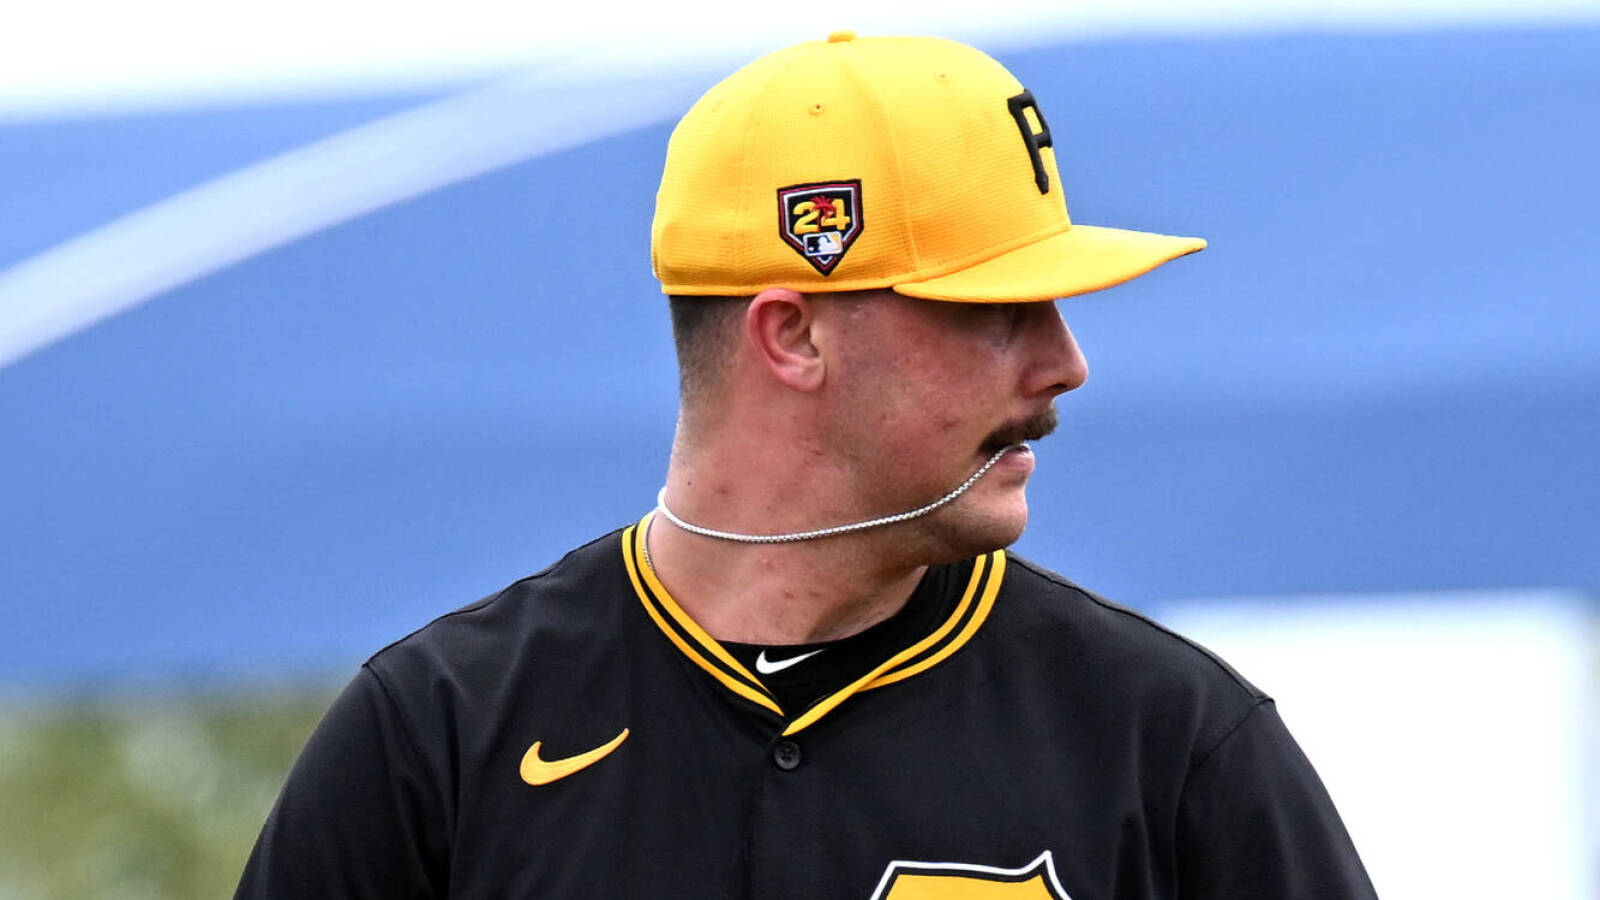 Pirates GM responds to calls to promote ace pitching prospect